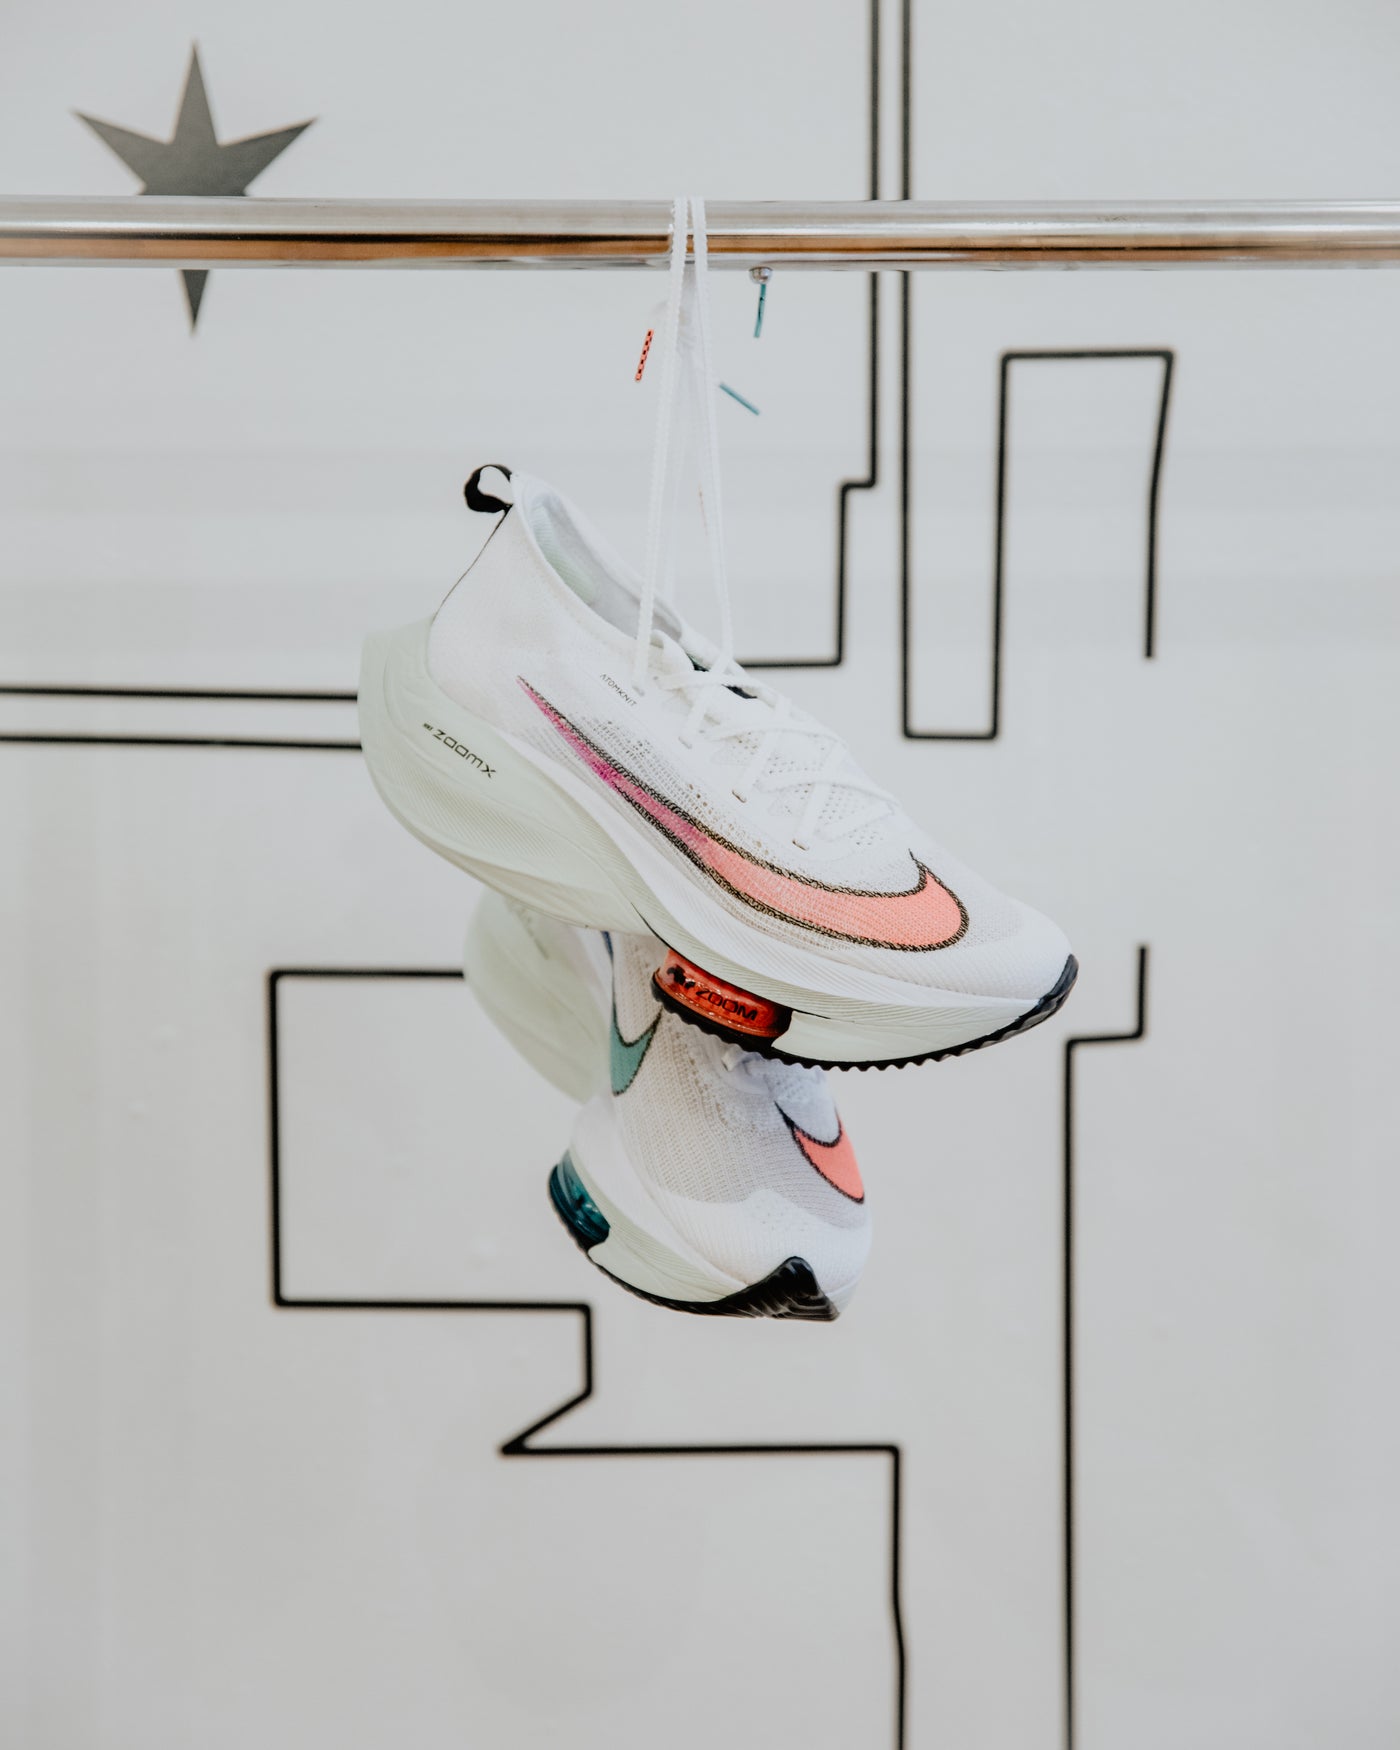 Nike Air Zoom Alphafly Next % & ZoomX Vaporfly Next% Launch Info